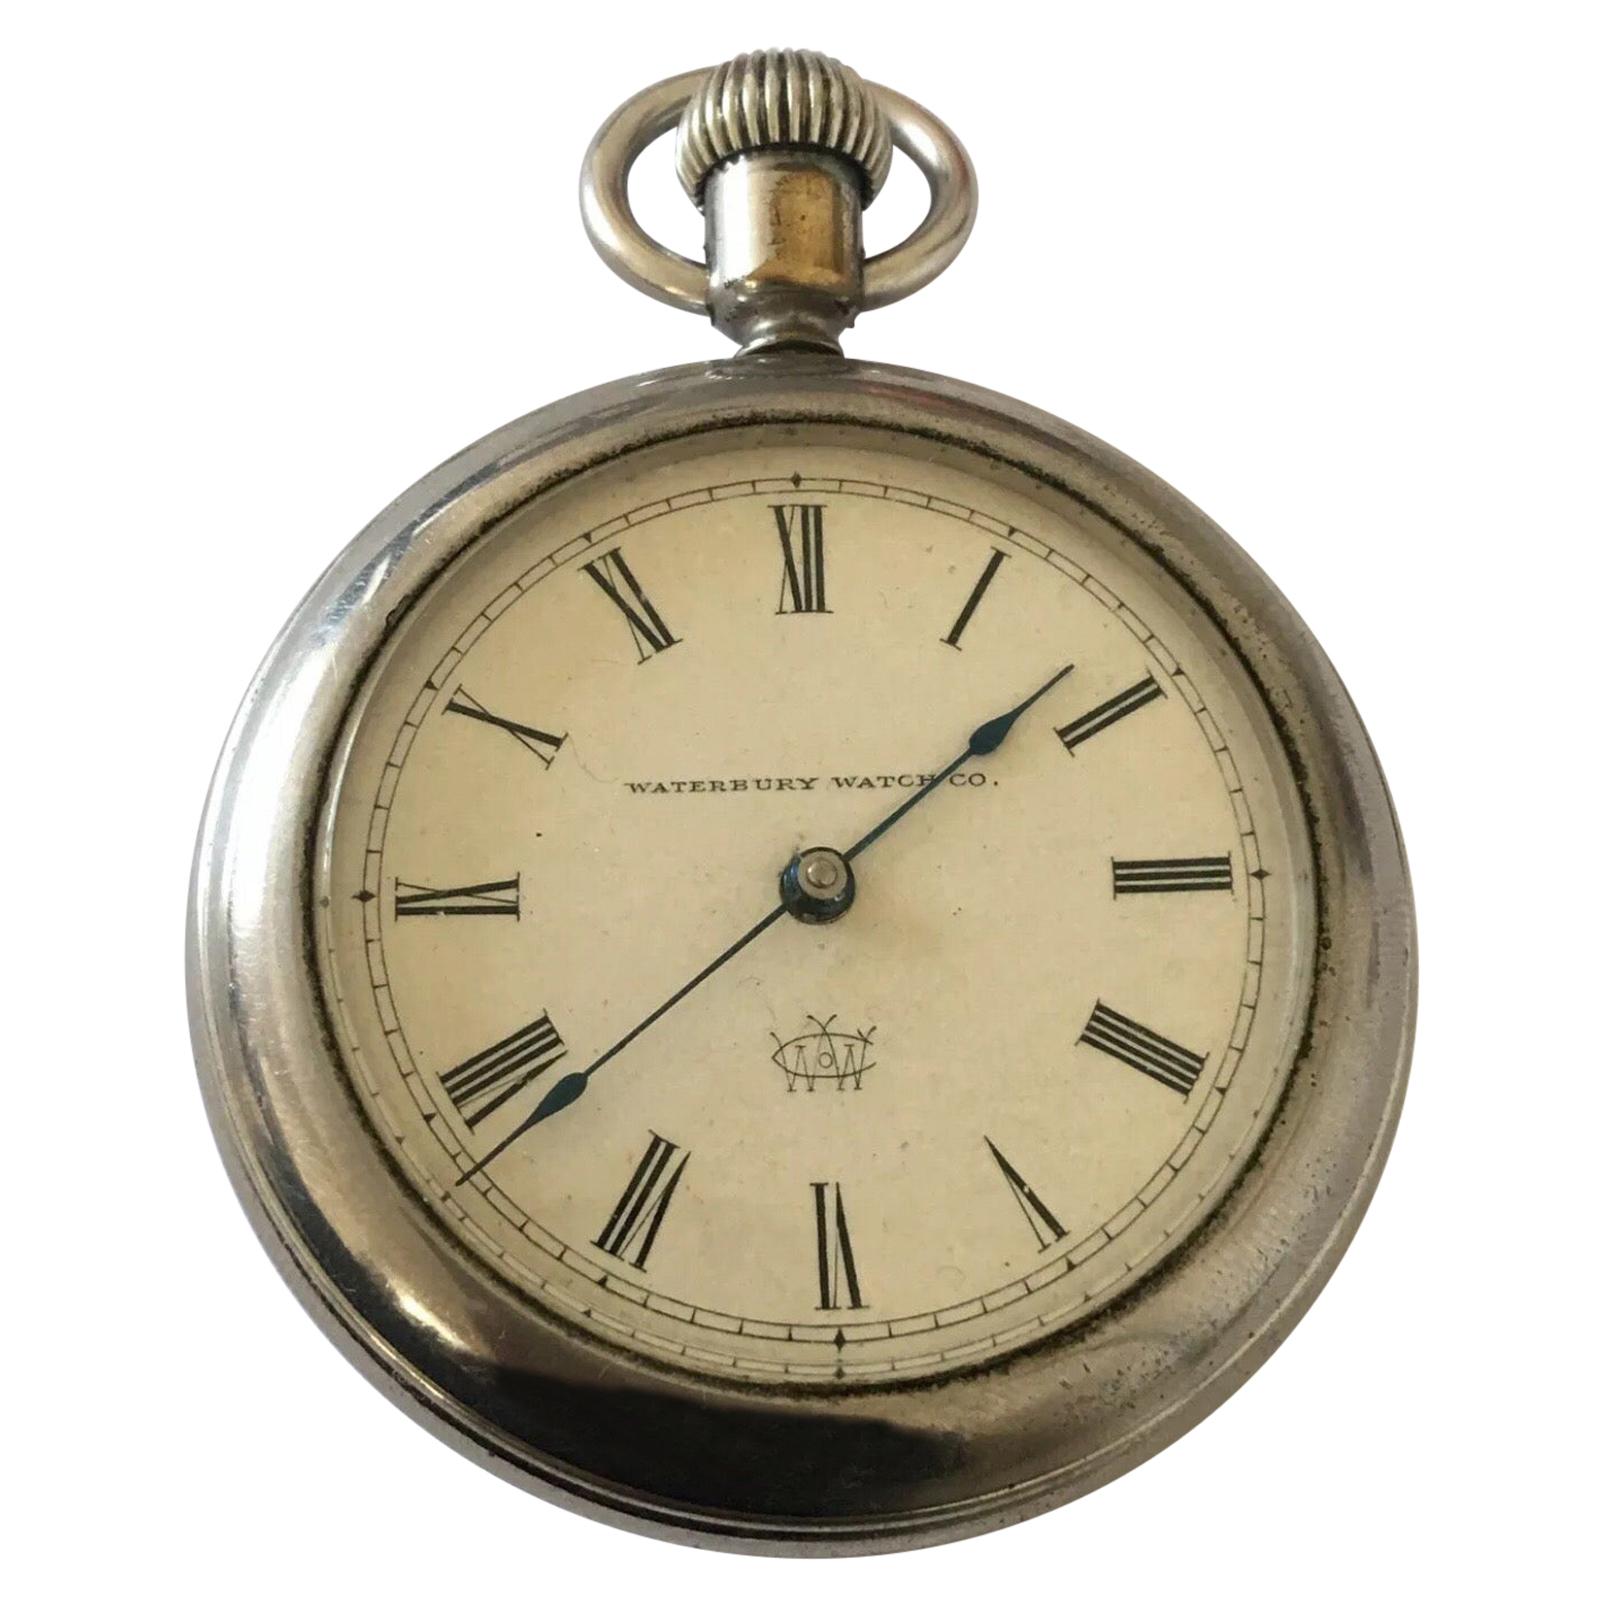 Antique Duplex Escapement Pocket Watch Signed The Waterbury Watch Co. For Sale